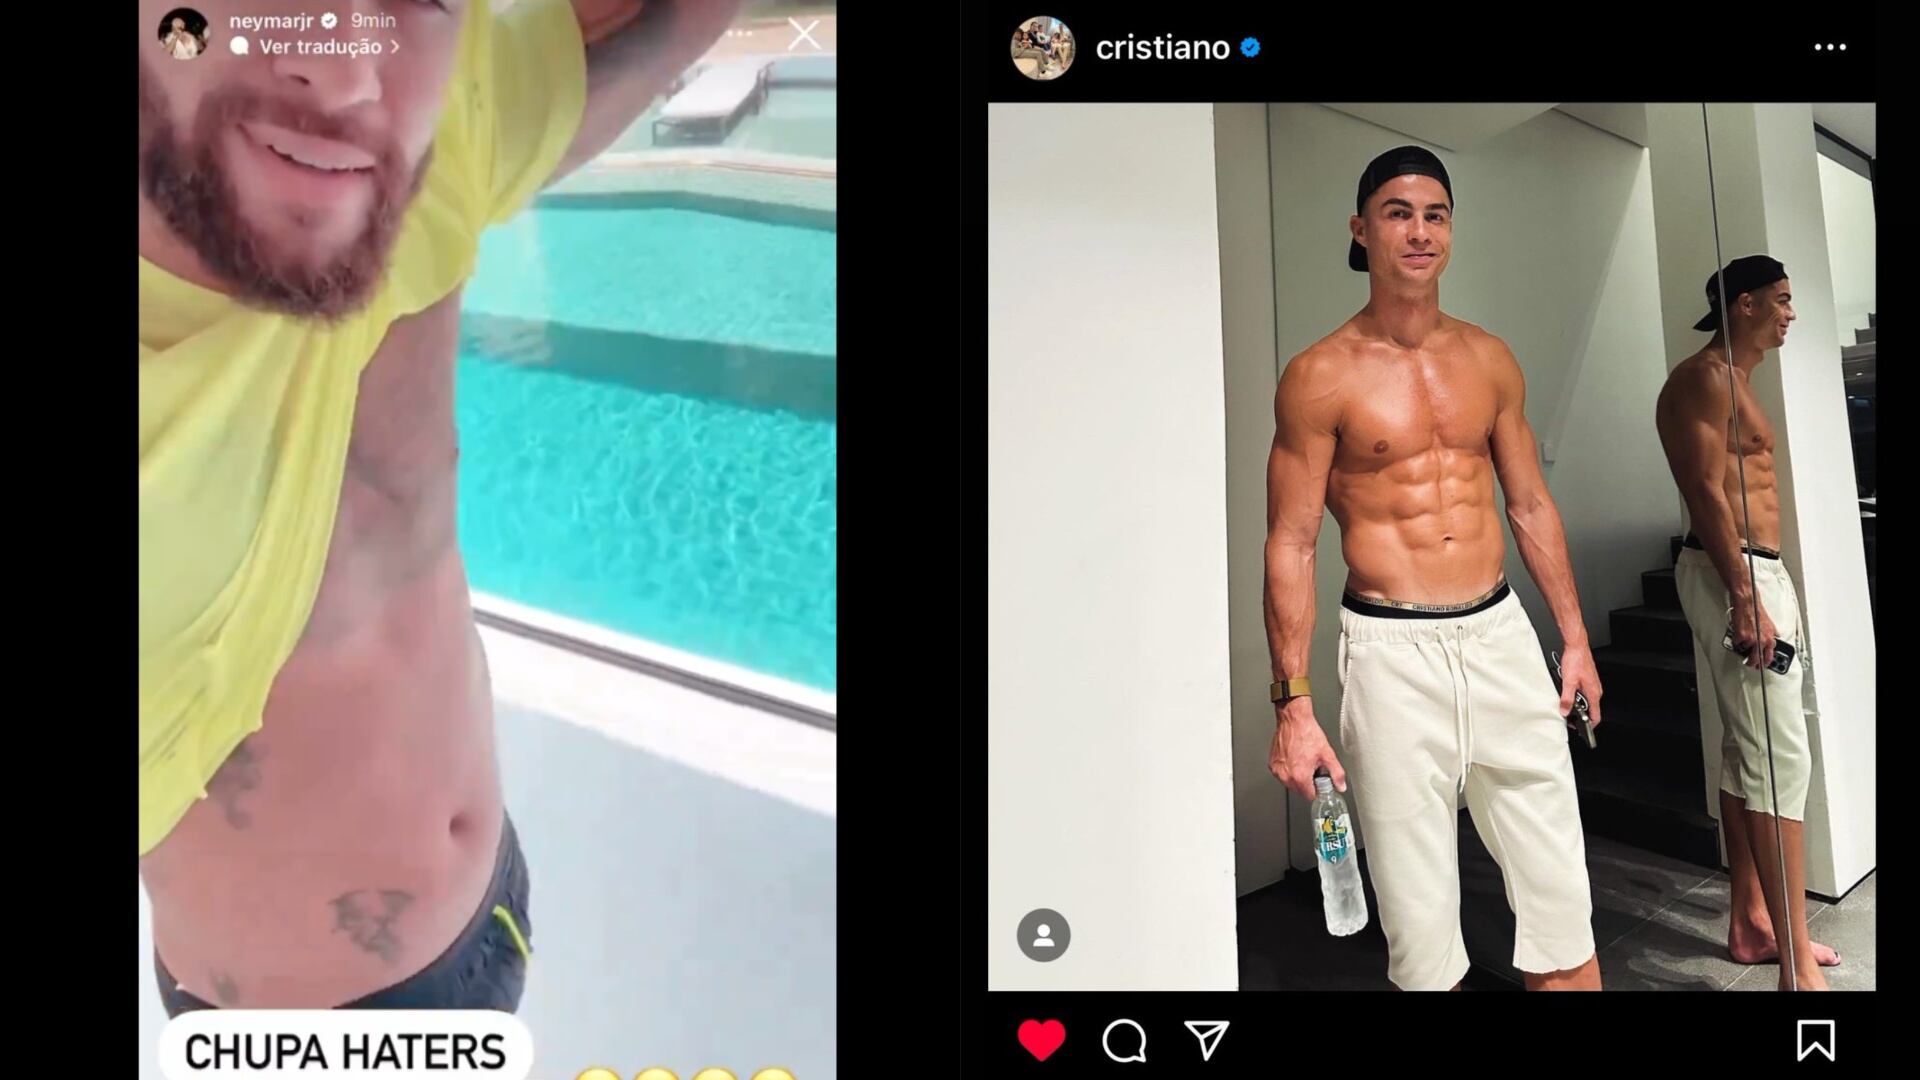 While Neymar admits being overweight, Cristiano's fitness before turning 39